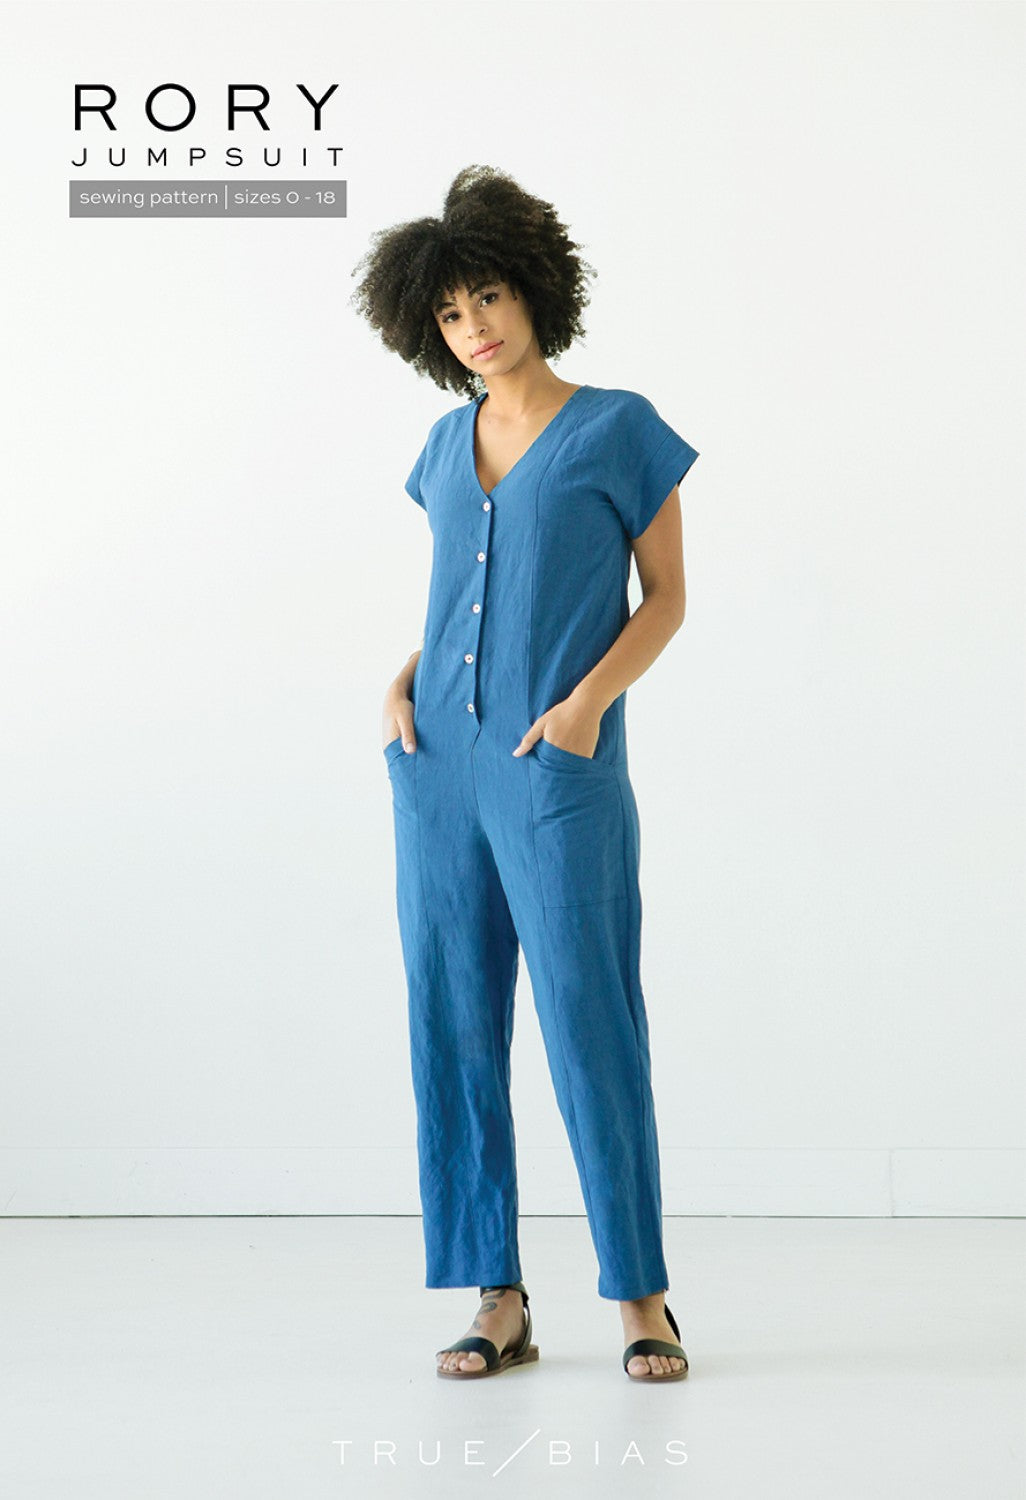 Rory Jumpsuit Pattern - sizes 0-18